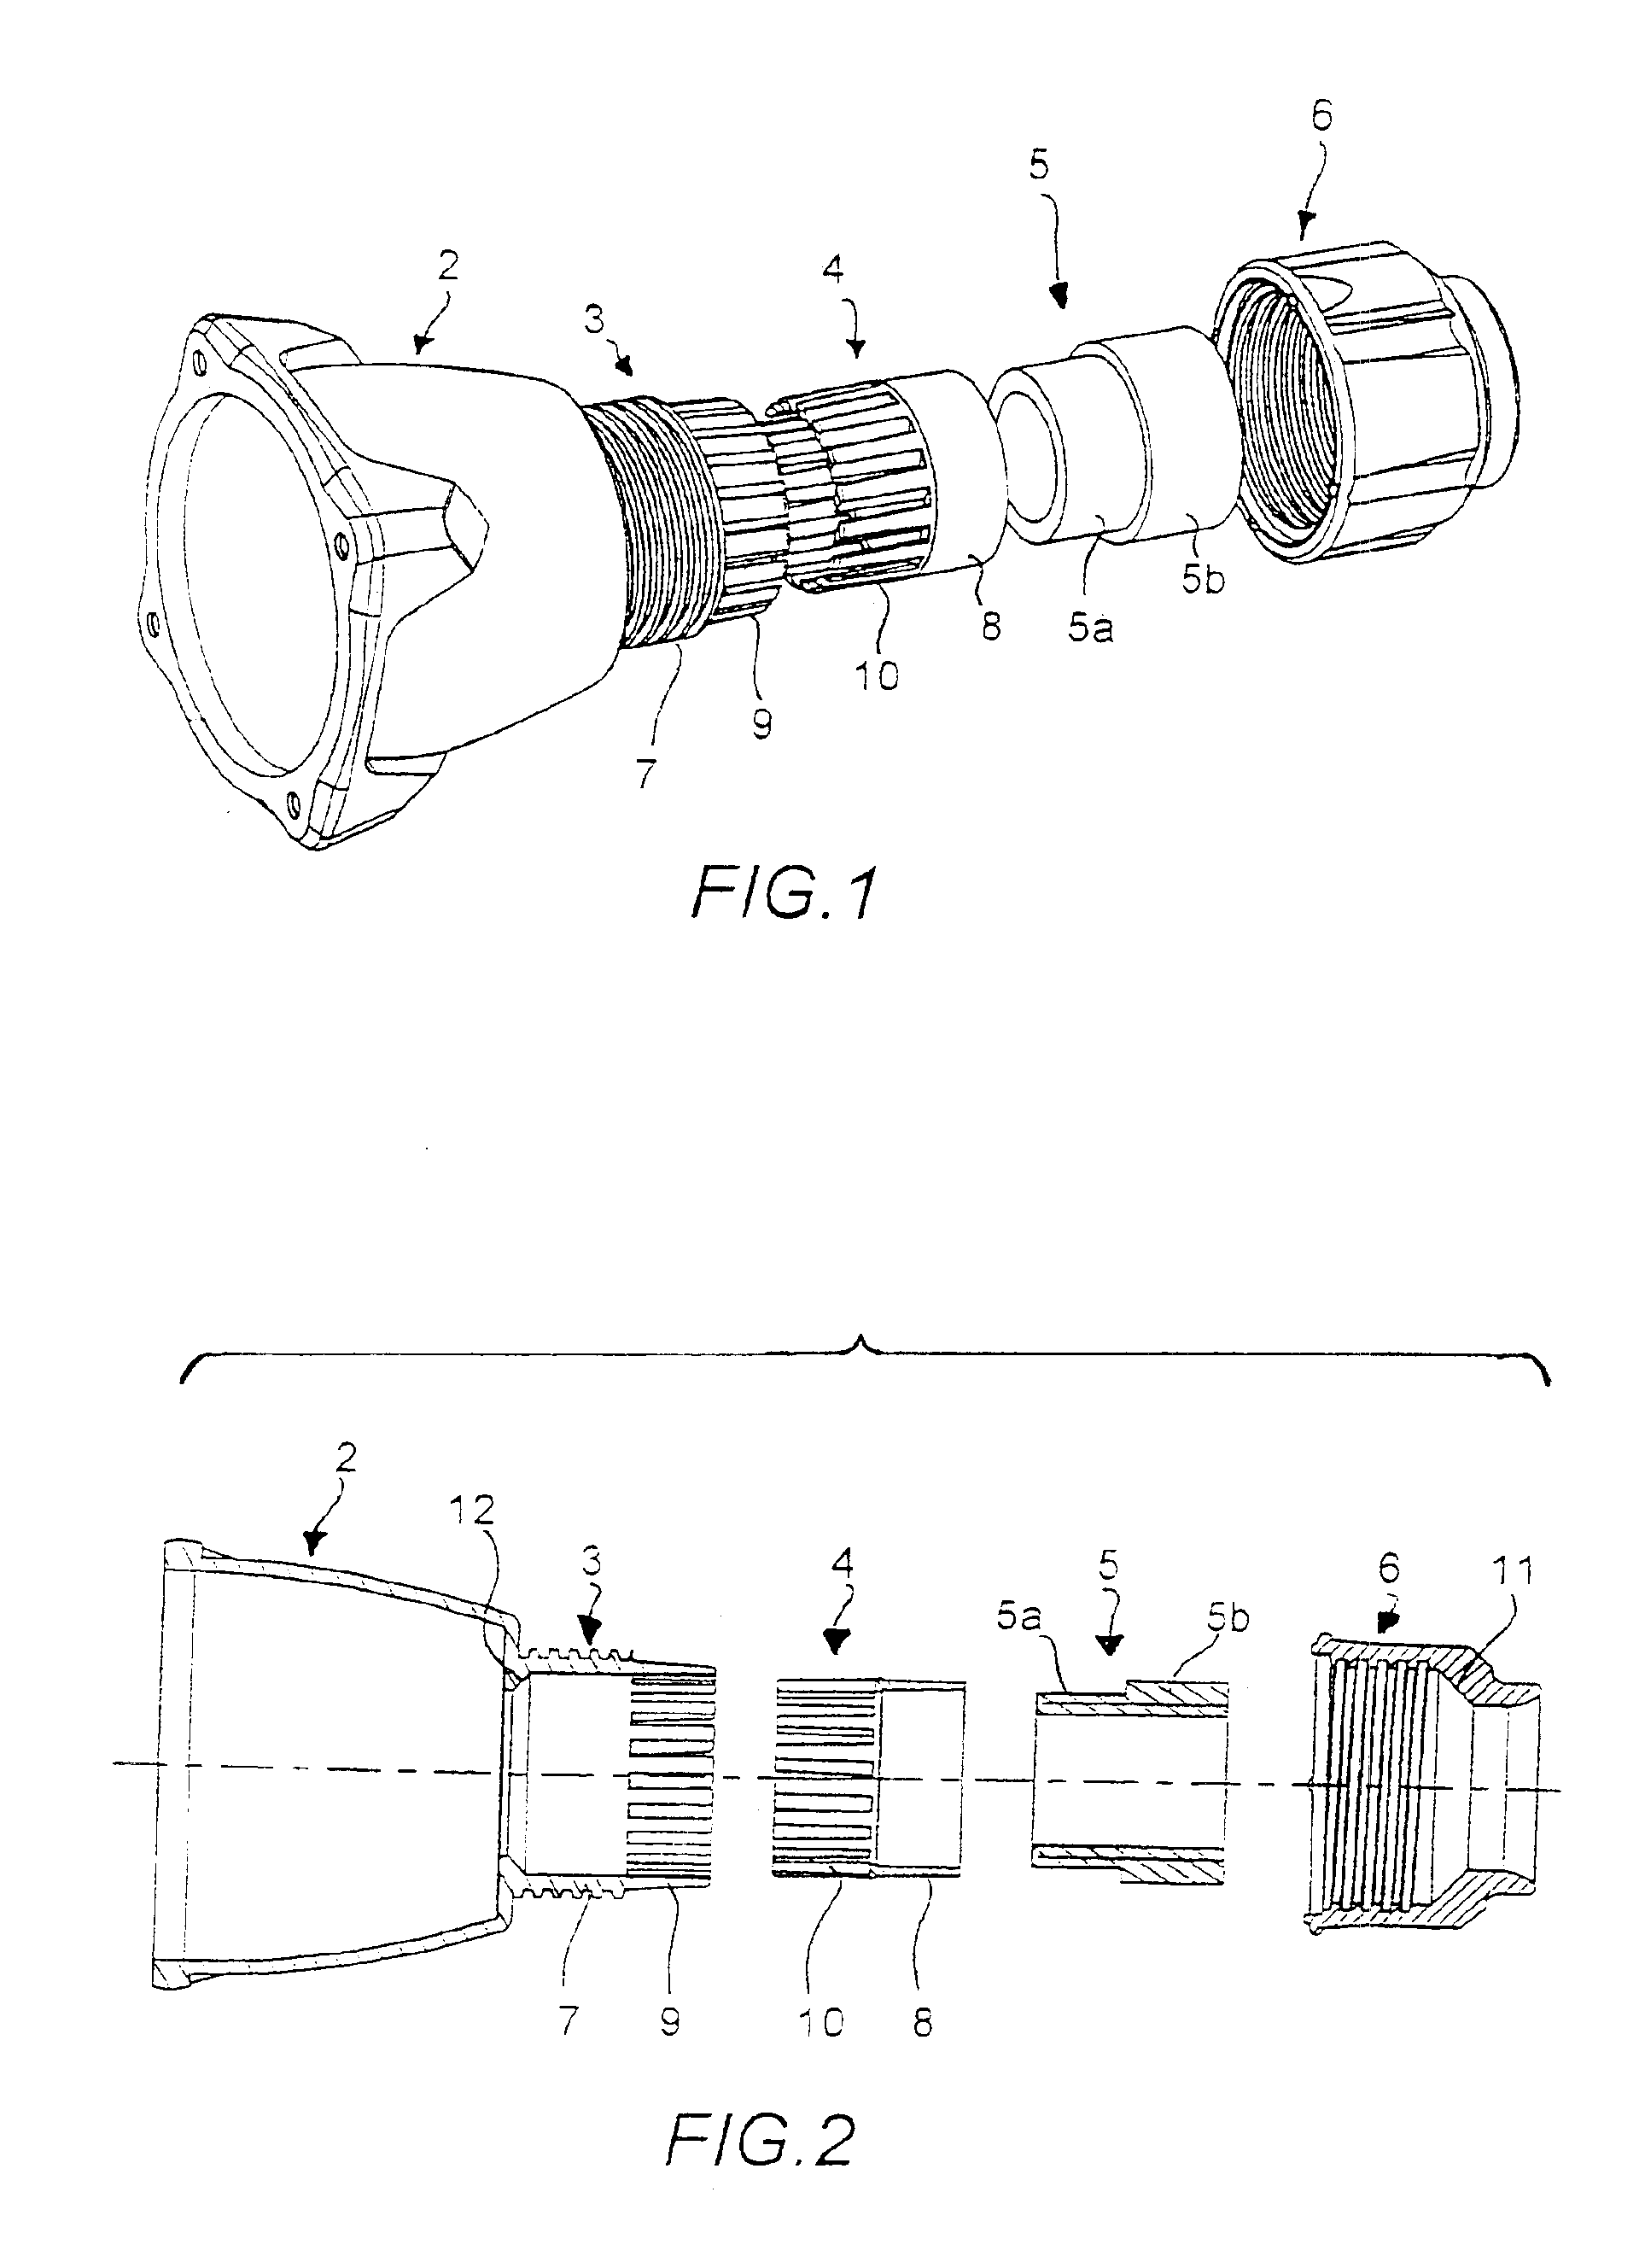 Device for axially retaining a cylindrical element and more particularly a cable